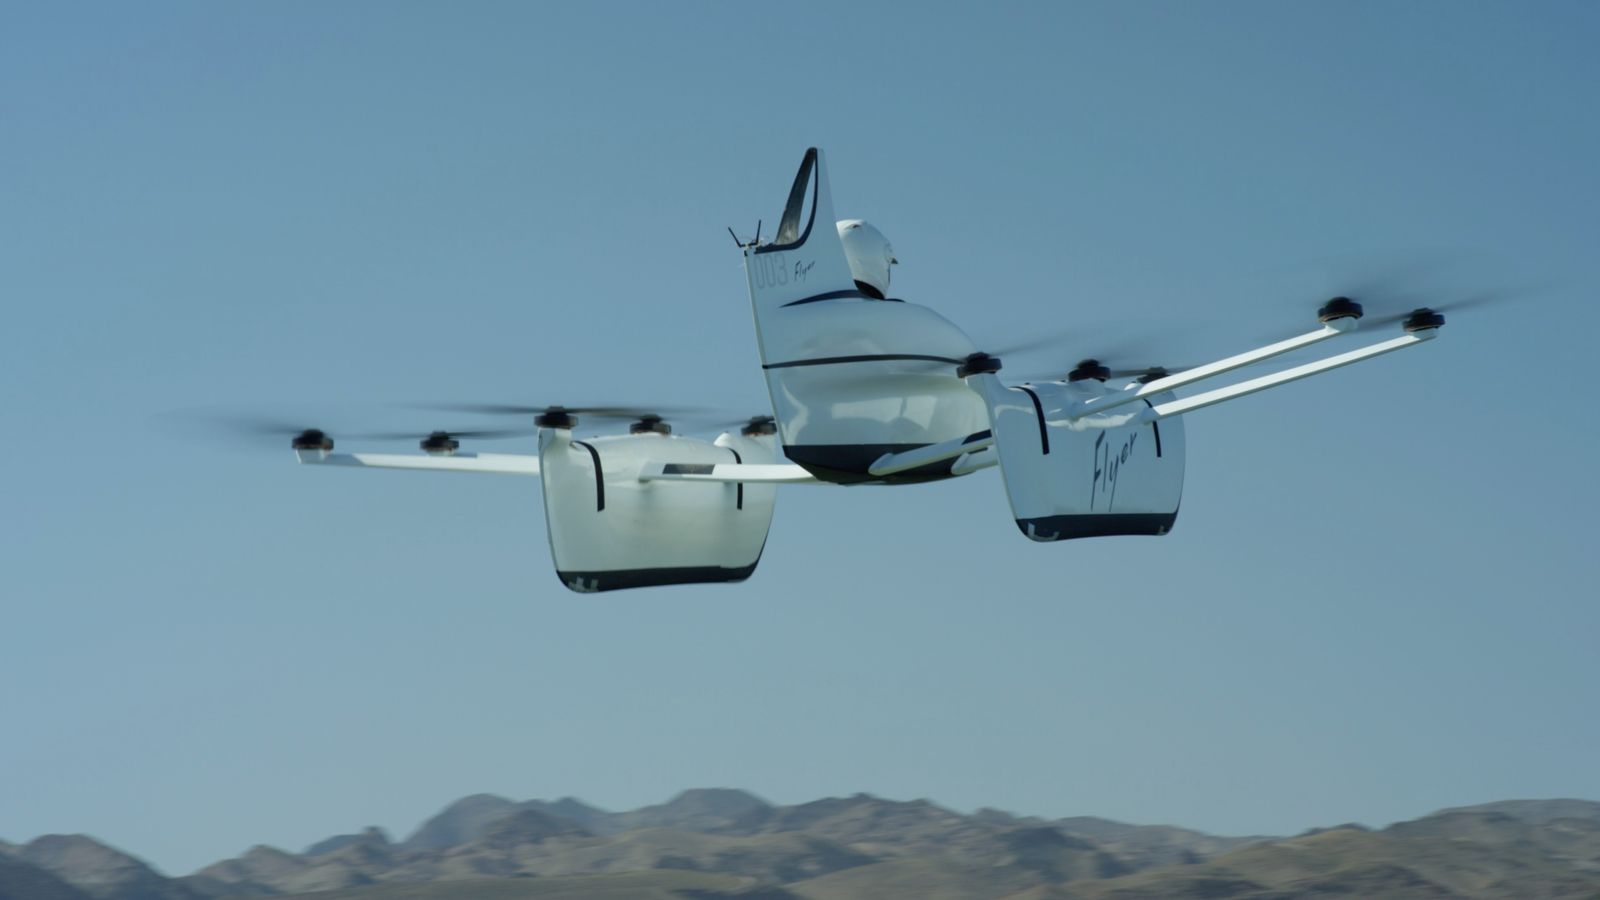 'Exciting step' as test drives of flying car begin | Science & Tech ...